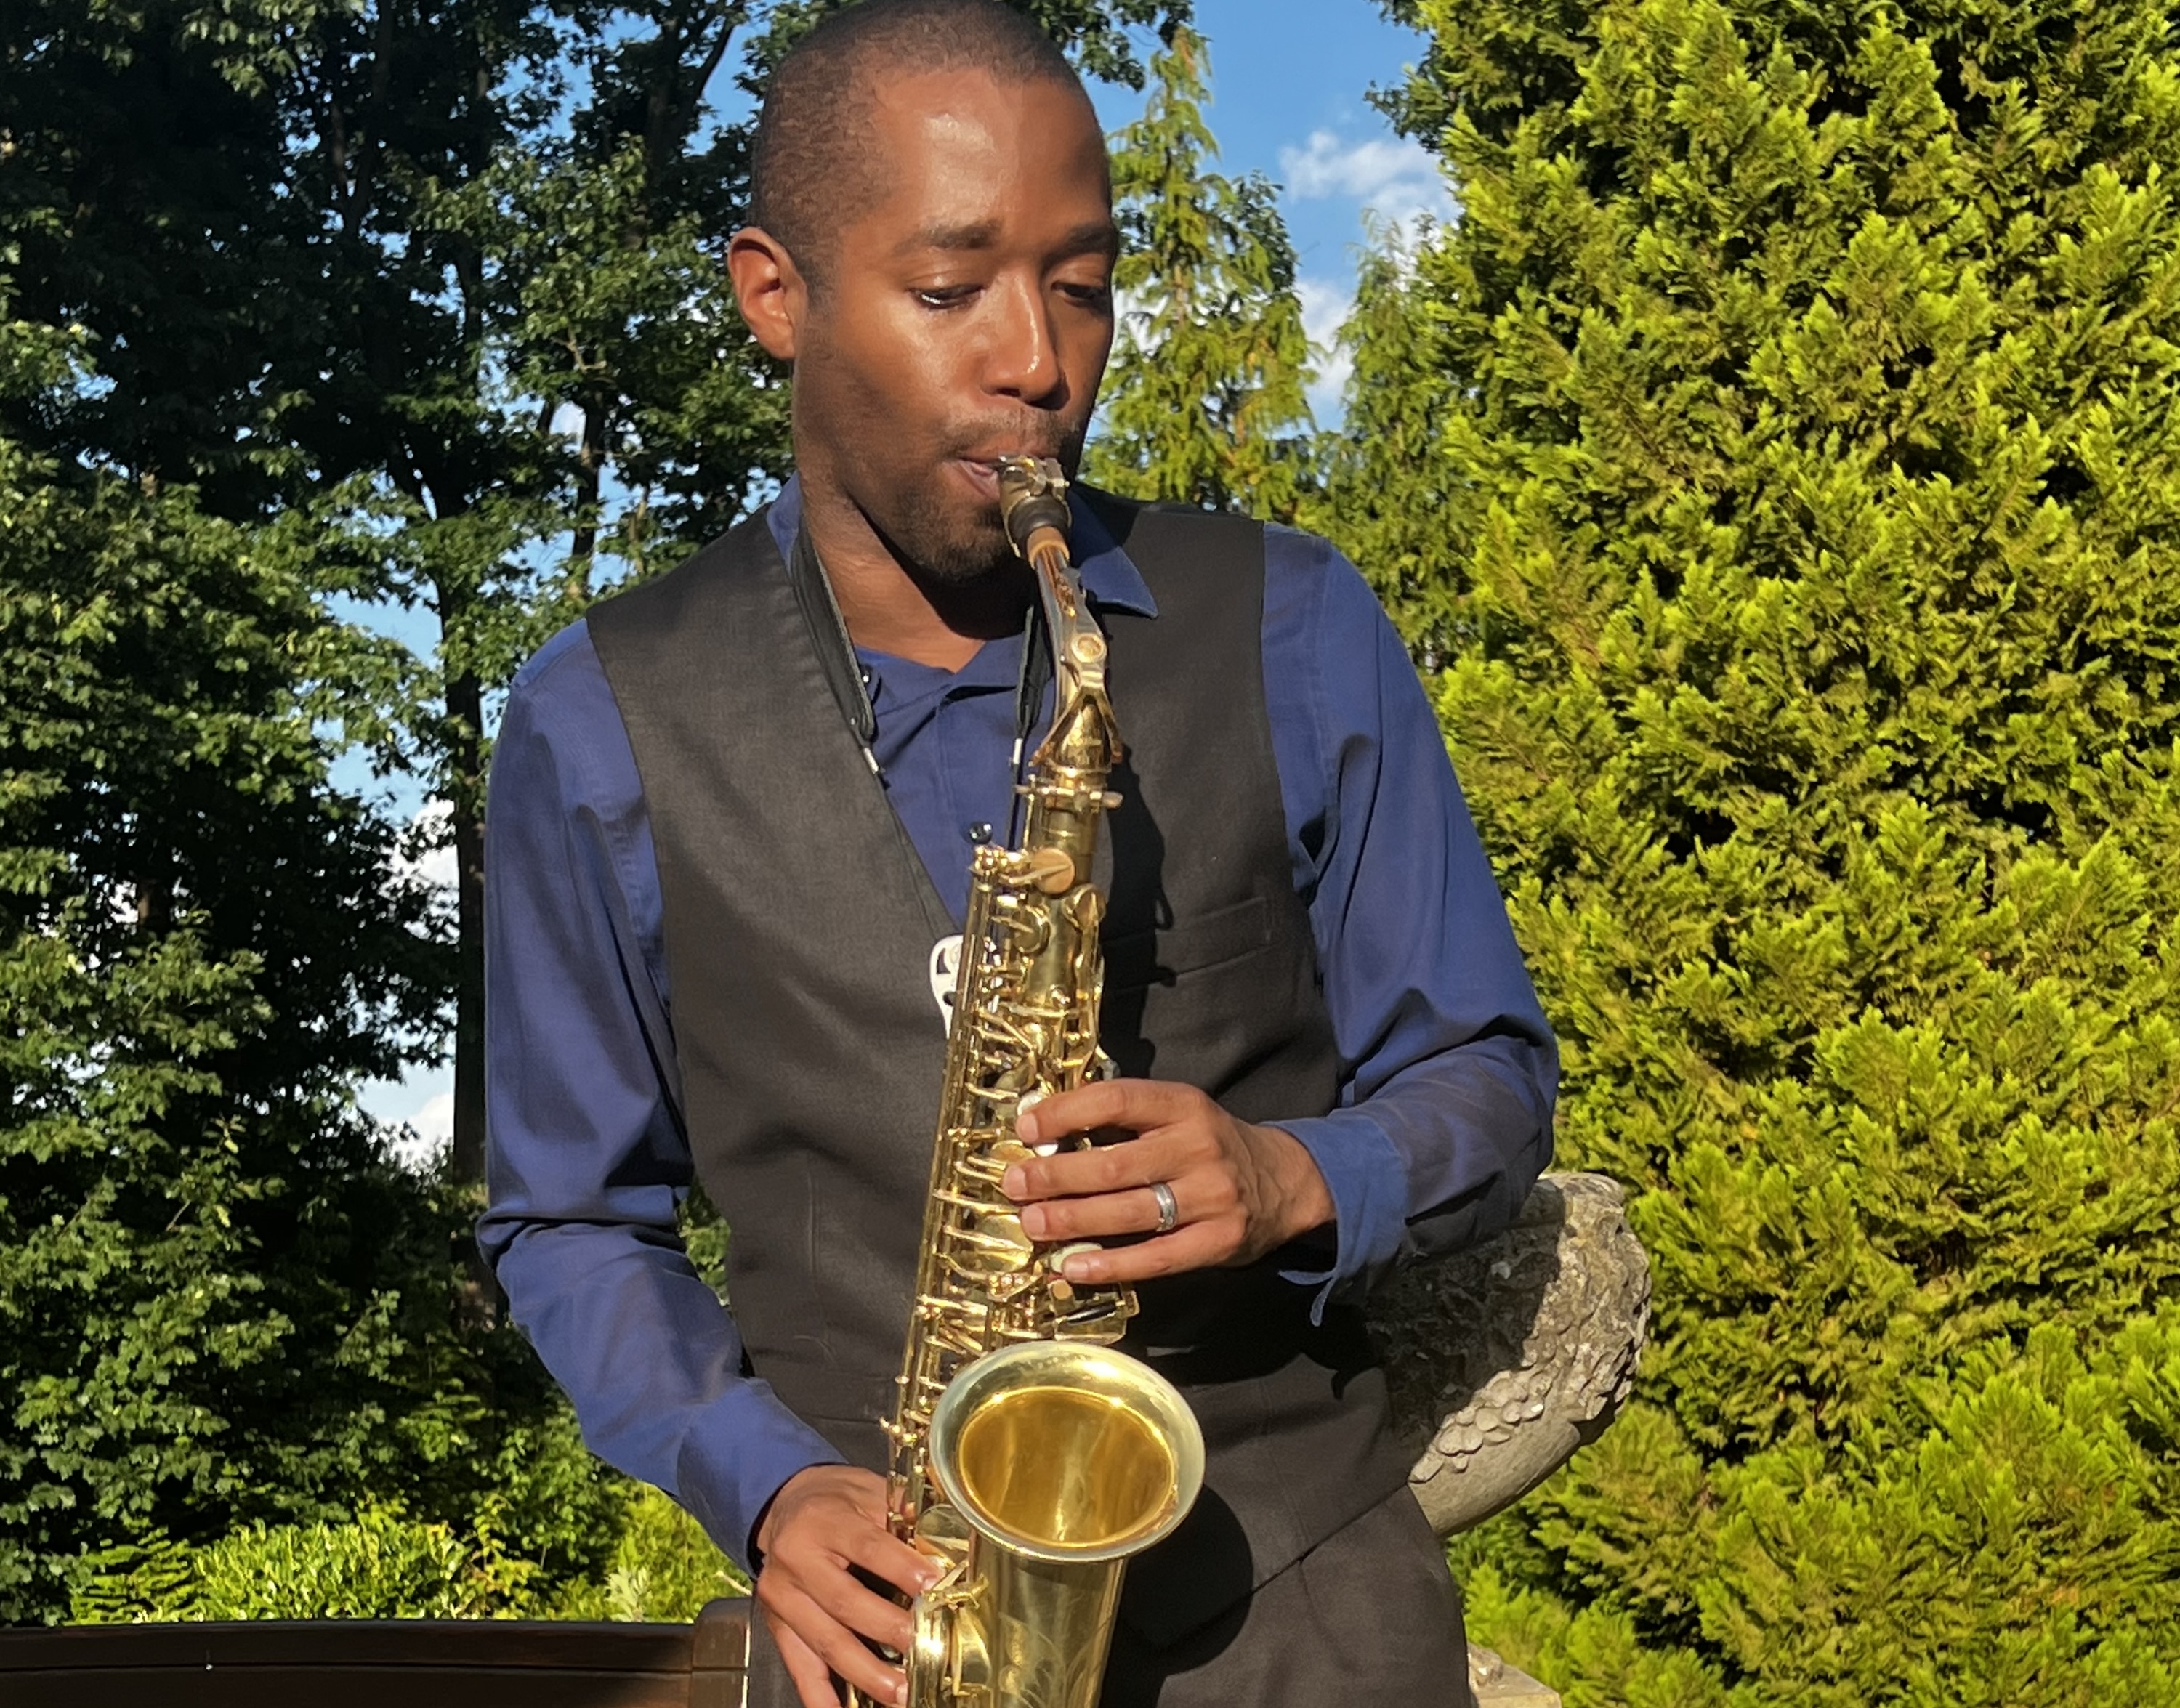 Devin playing saxophone at an outdoor wedding reception